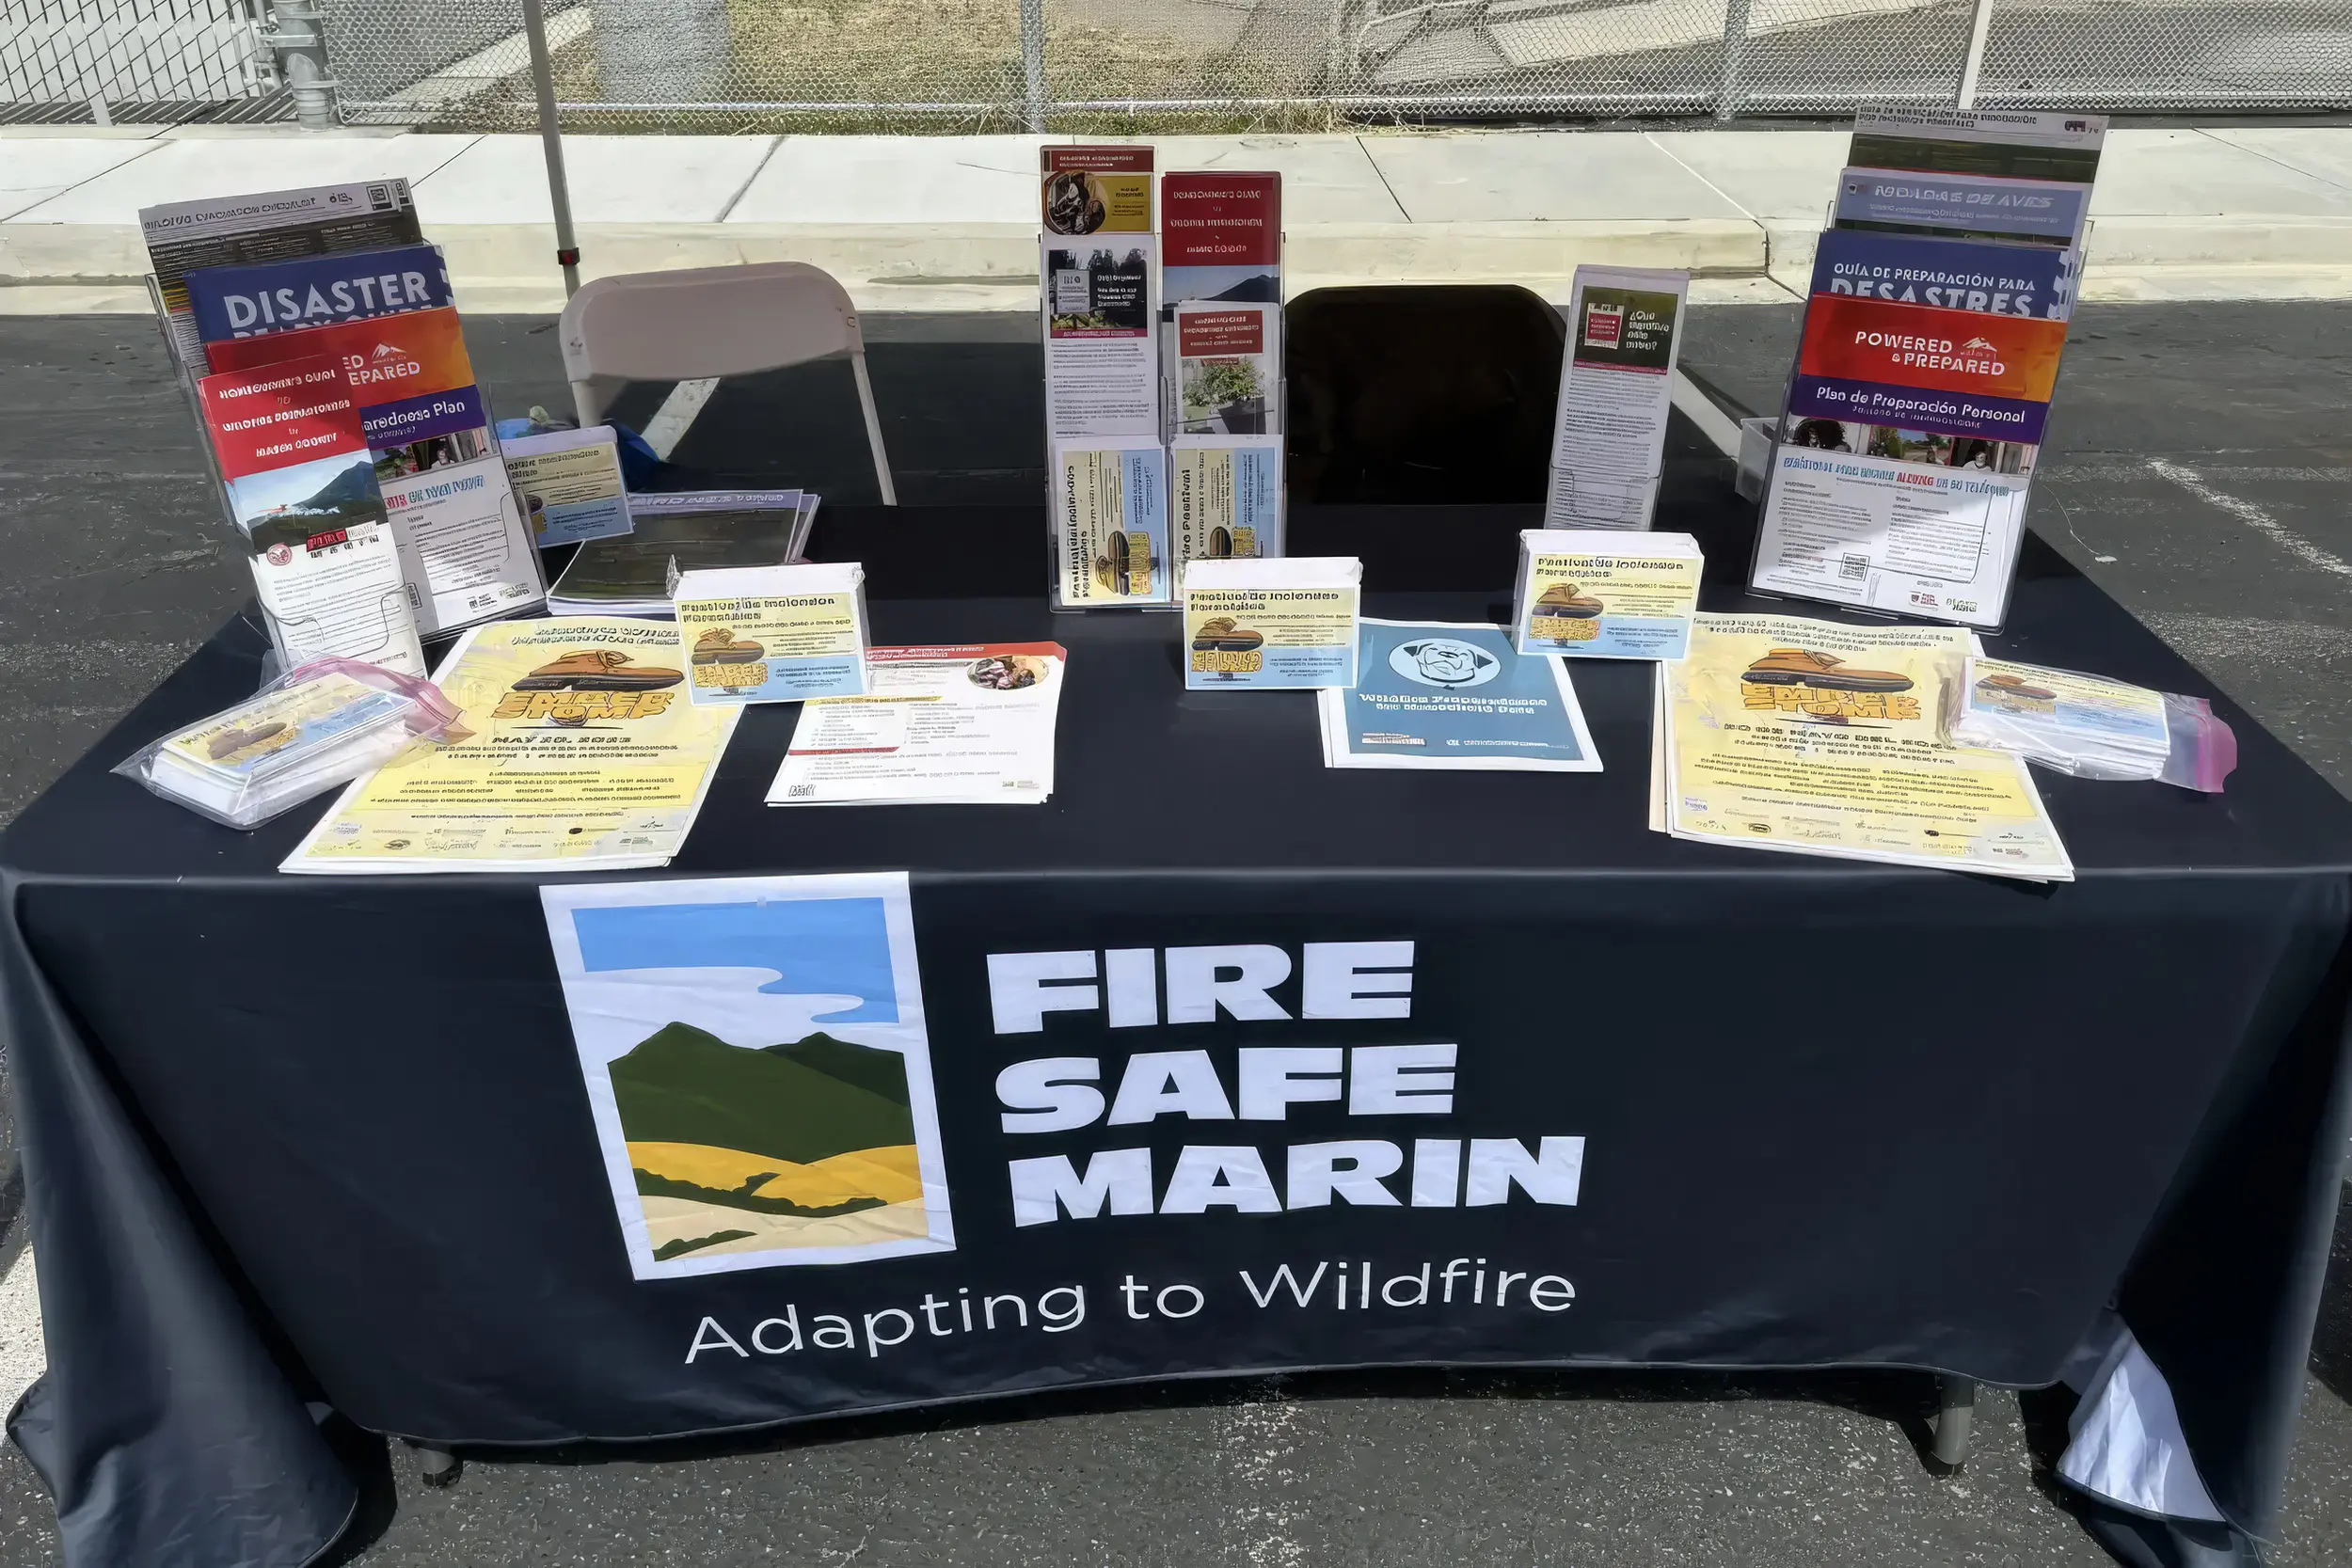 fire safe marin print materials on table